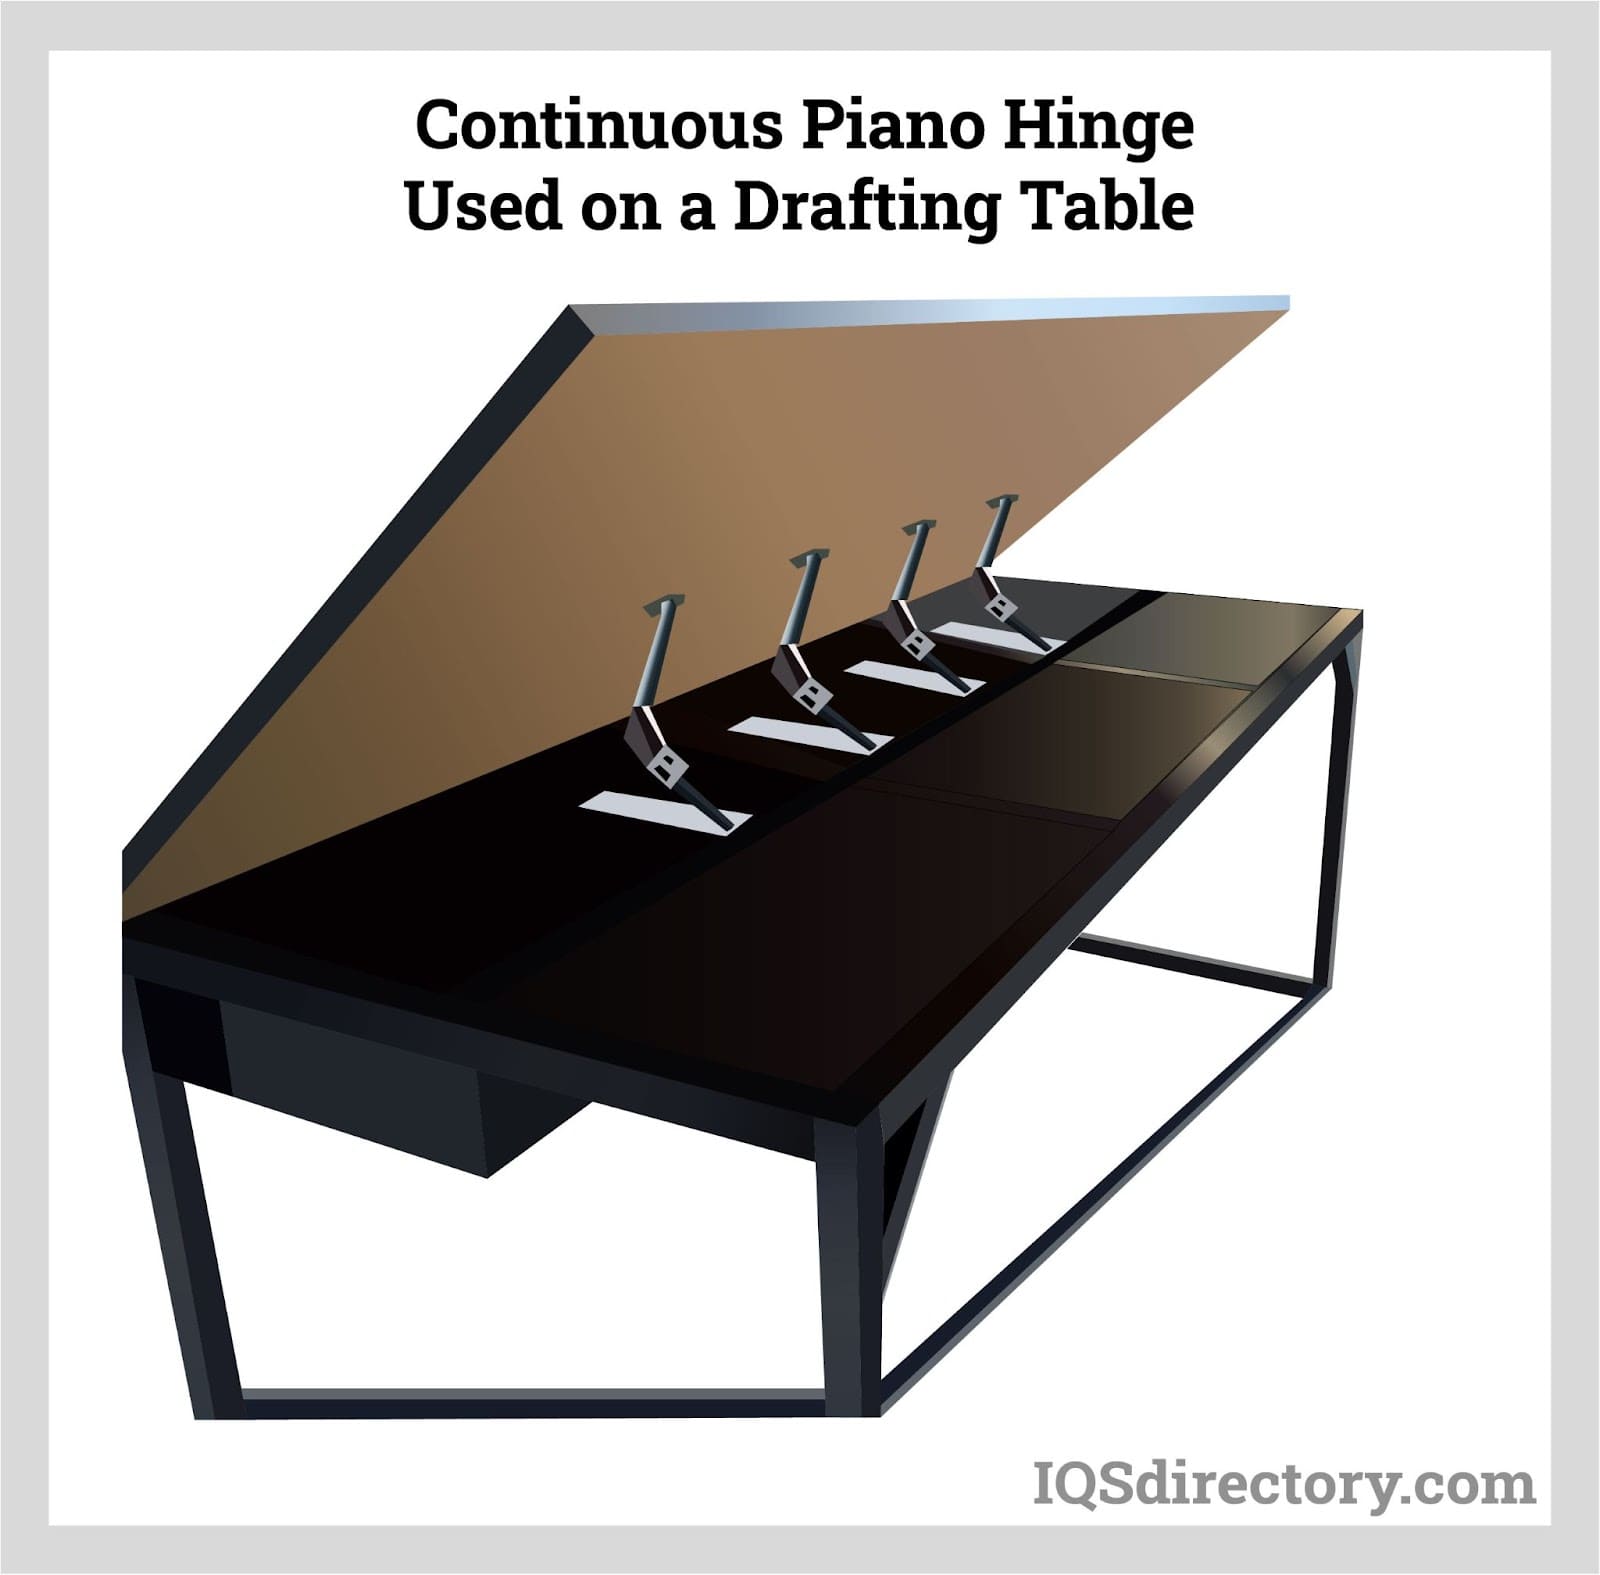 Continuous Piano Hinge Used on a Drafting Table